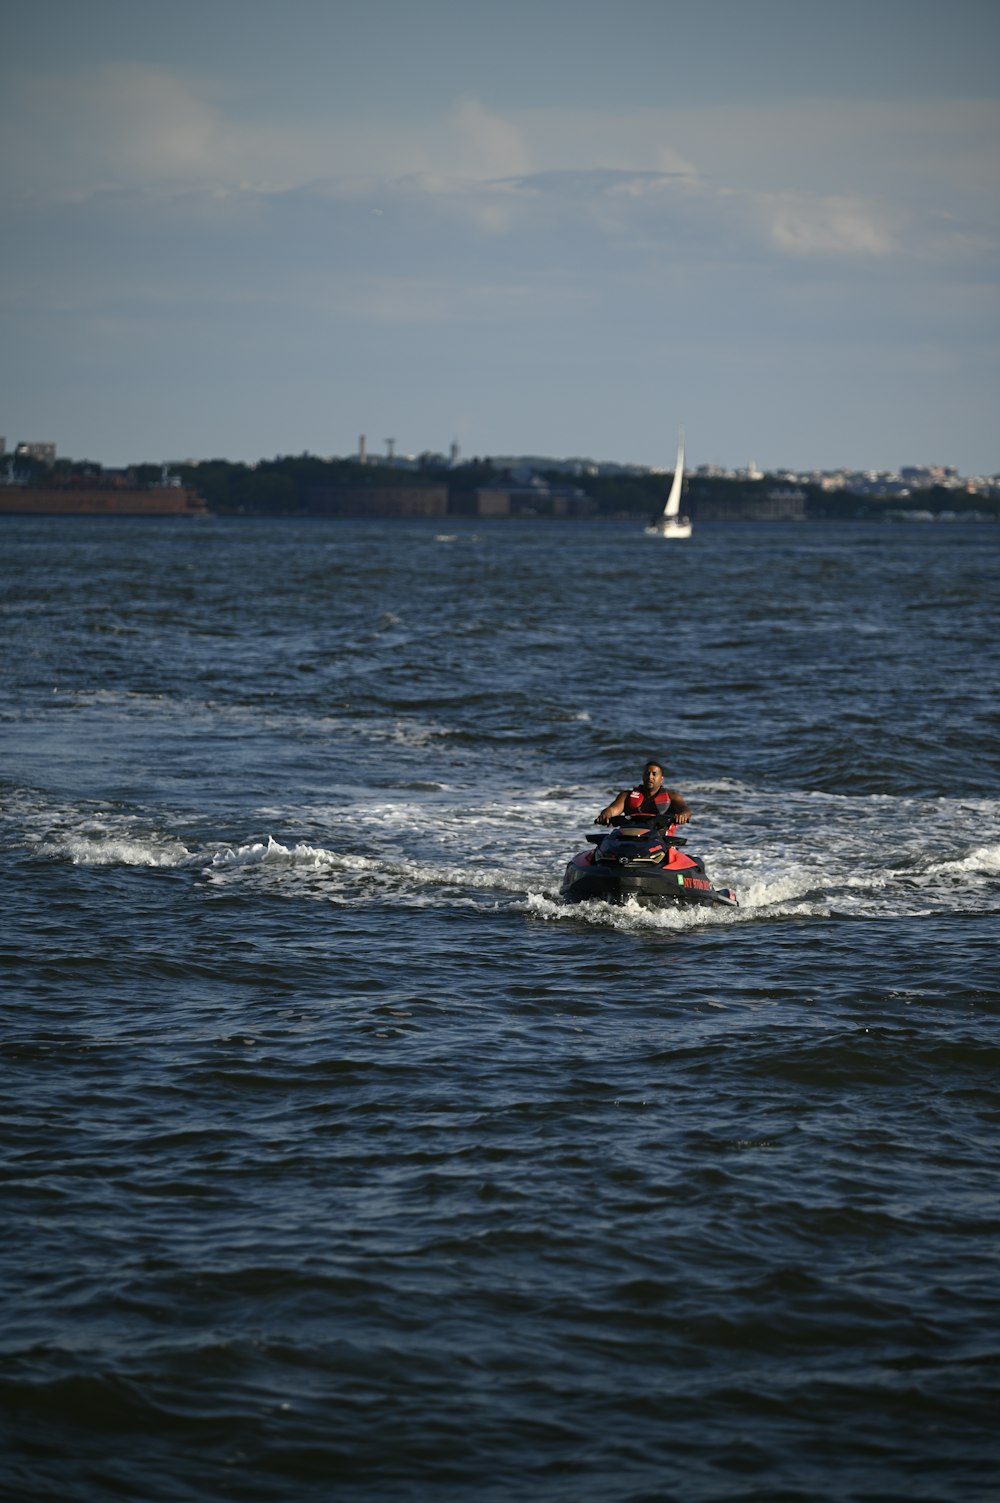 man in red and black vest riding on red kayak on sea during daytime